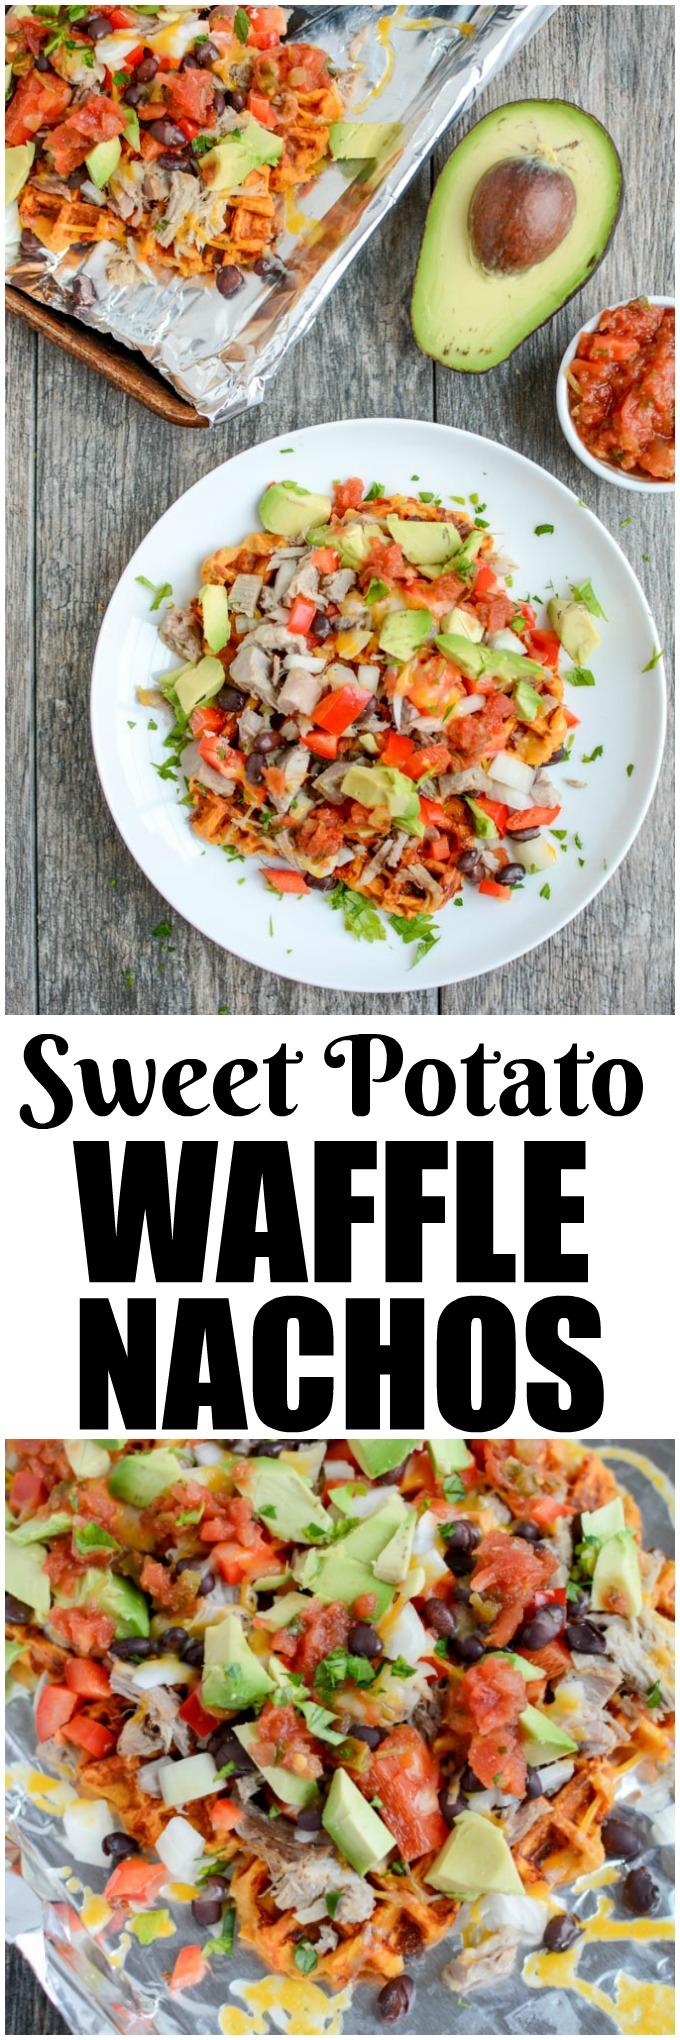 These easy Sweet Potato Waffle Nachos are a great way to transform leftover pulled pork or chicken into a healthy new lunch or dinner. This recipe would also make a great party appetizer!